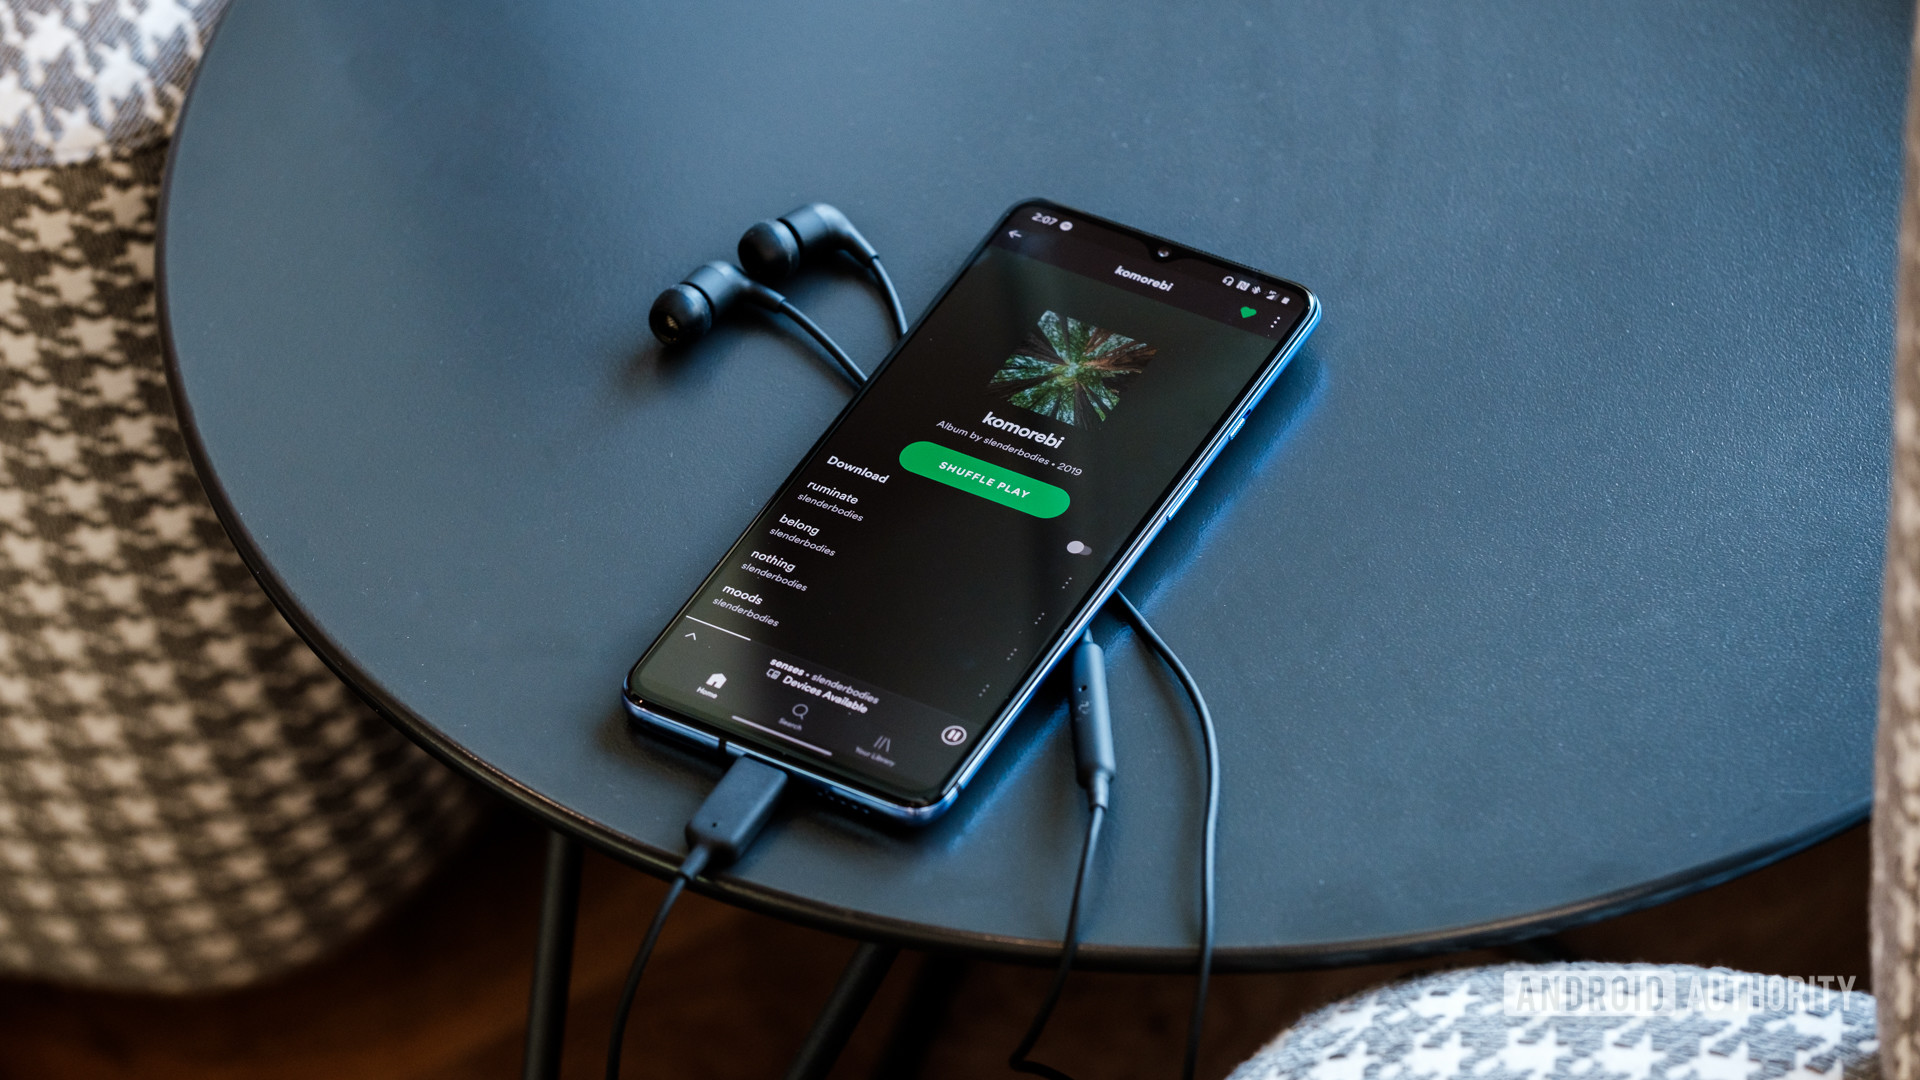 How.to.download Somgs.to.your.phone.from.spotify